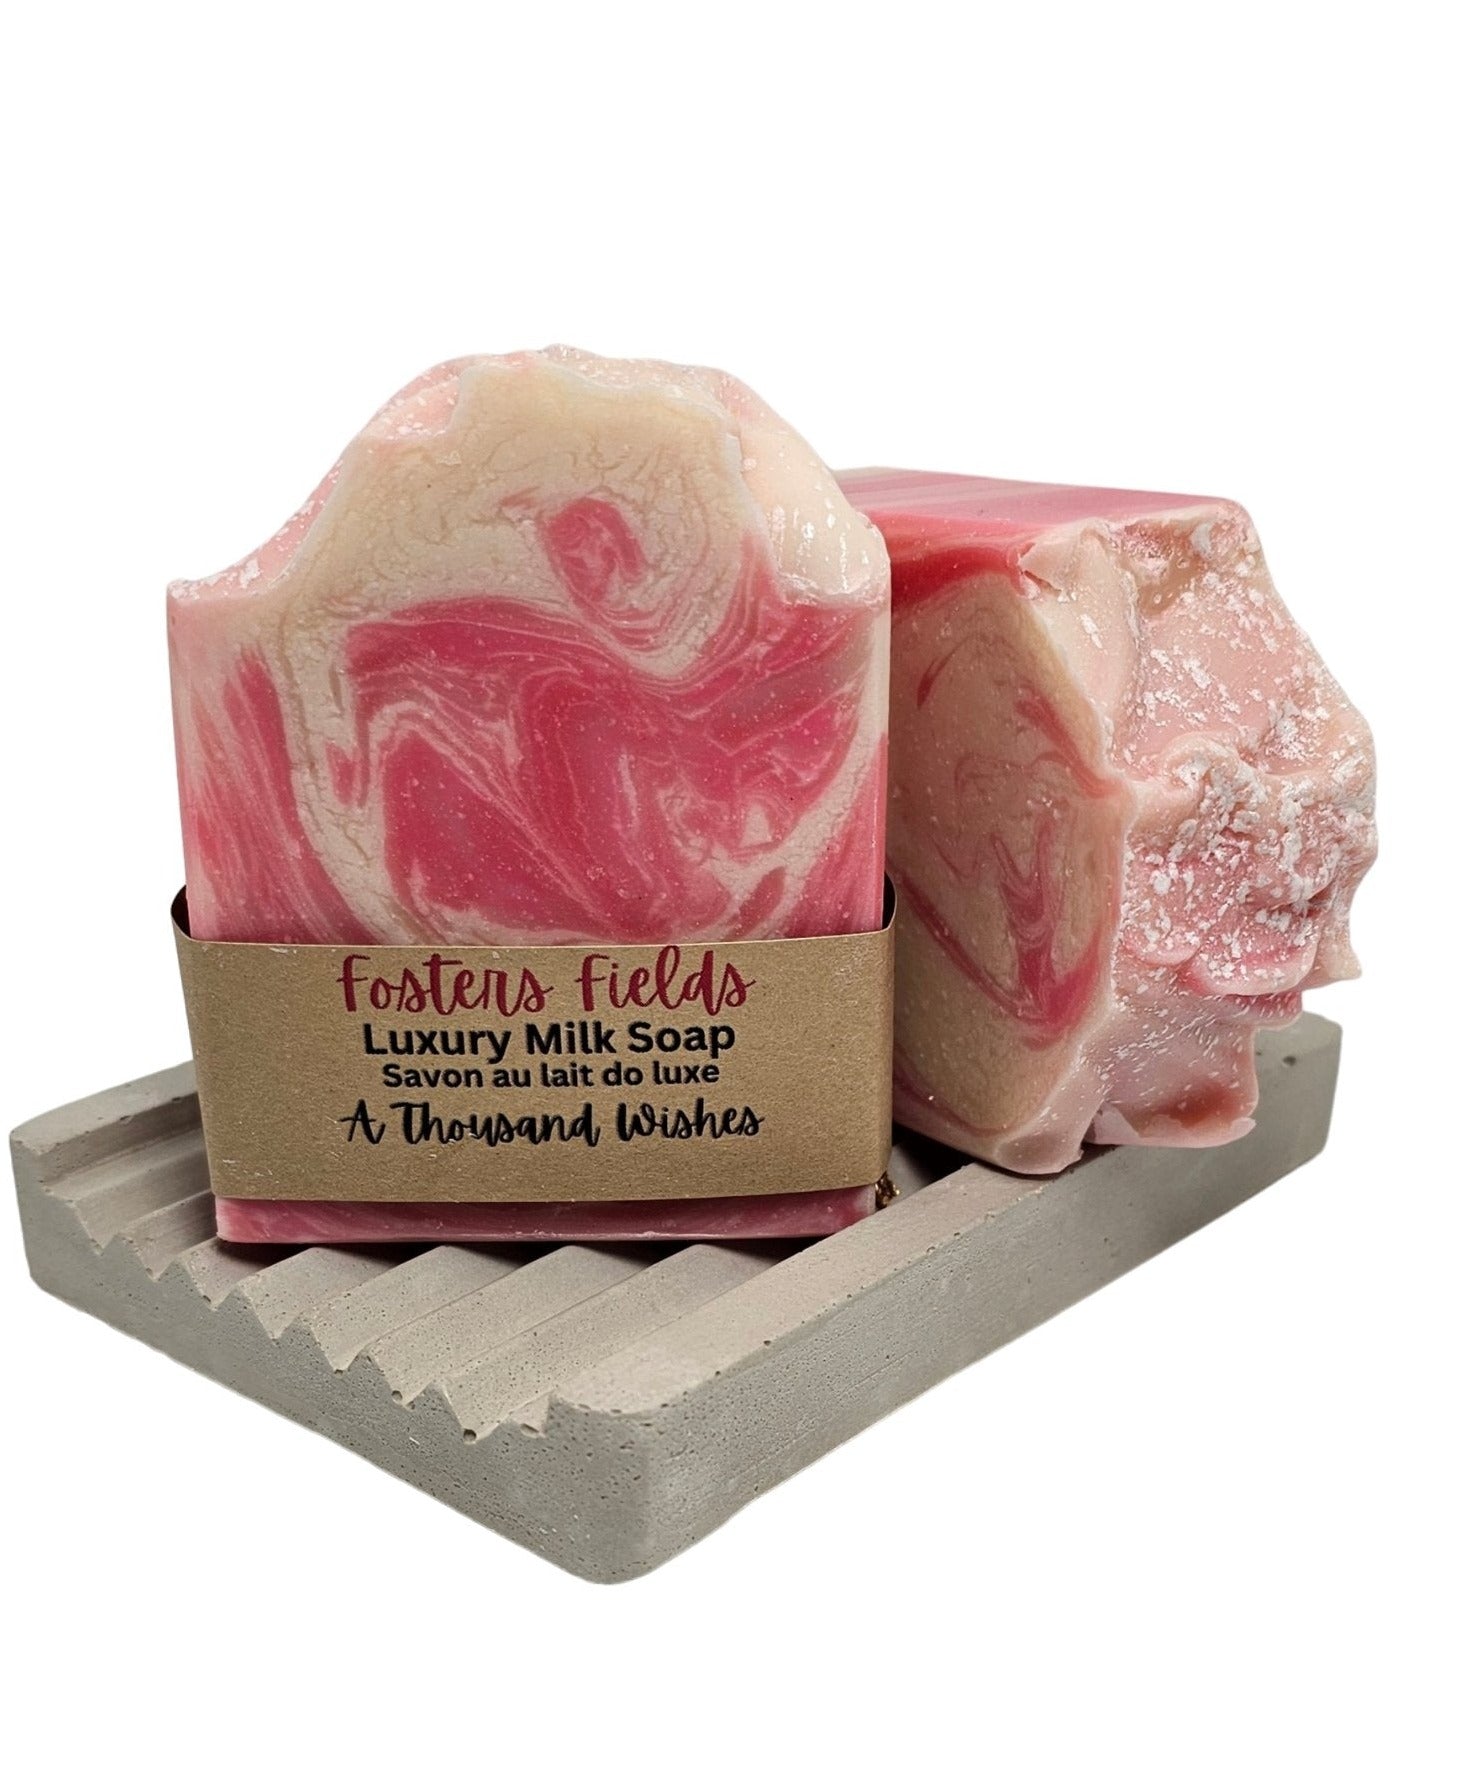 Pink and WHite swirled Handmade soap scented in a feminine fragrance of peonies and jasimine